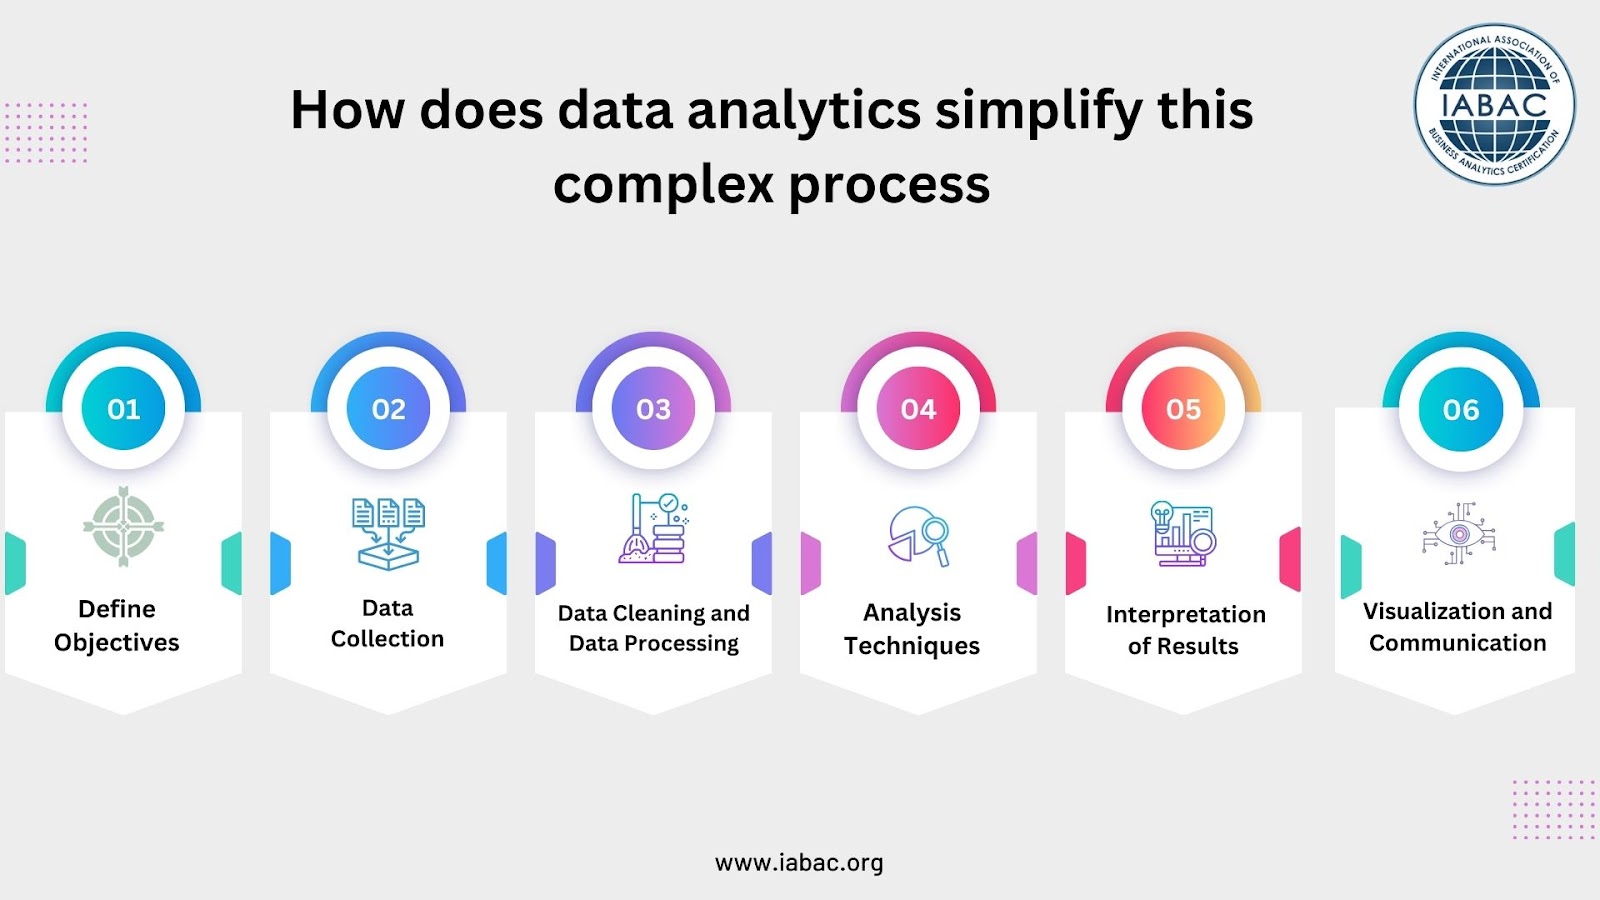 How Data Analytics Works in Simple Steps